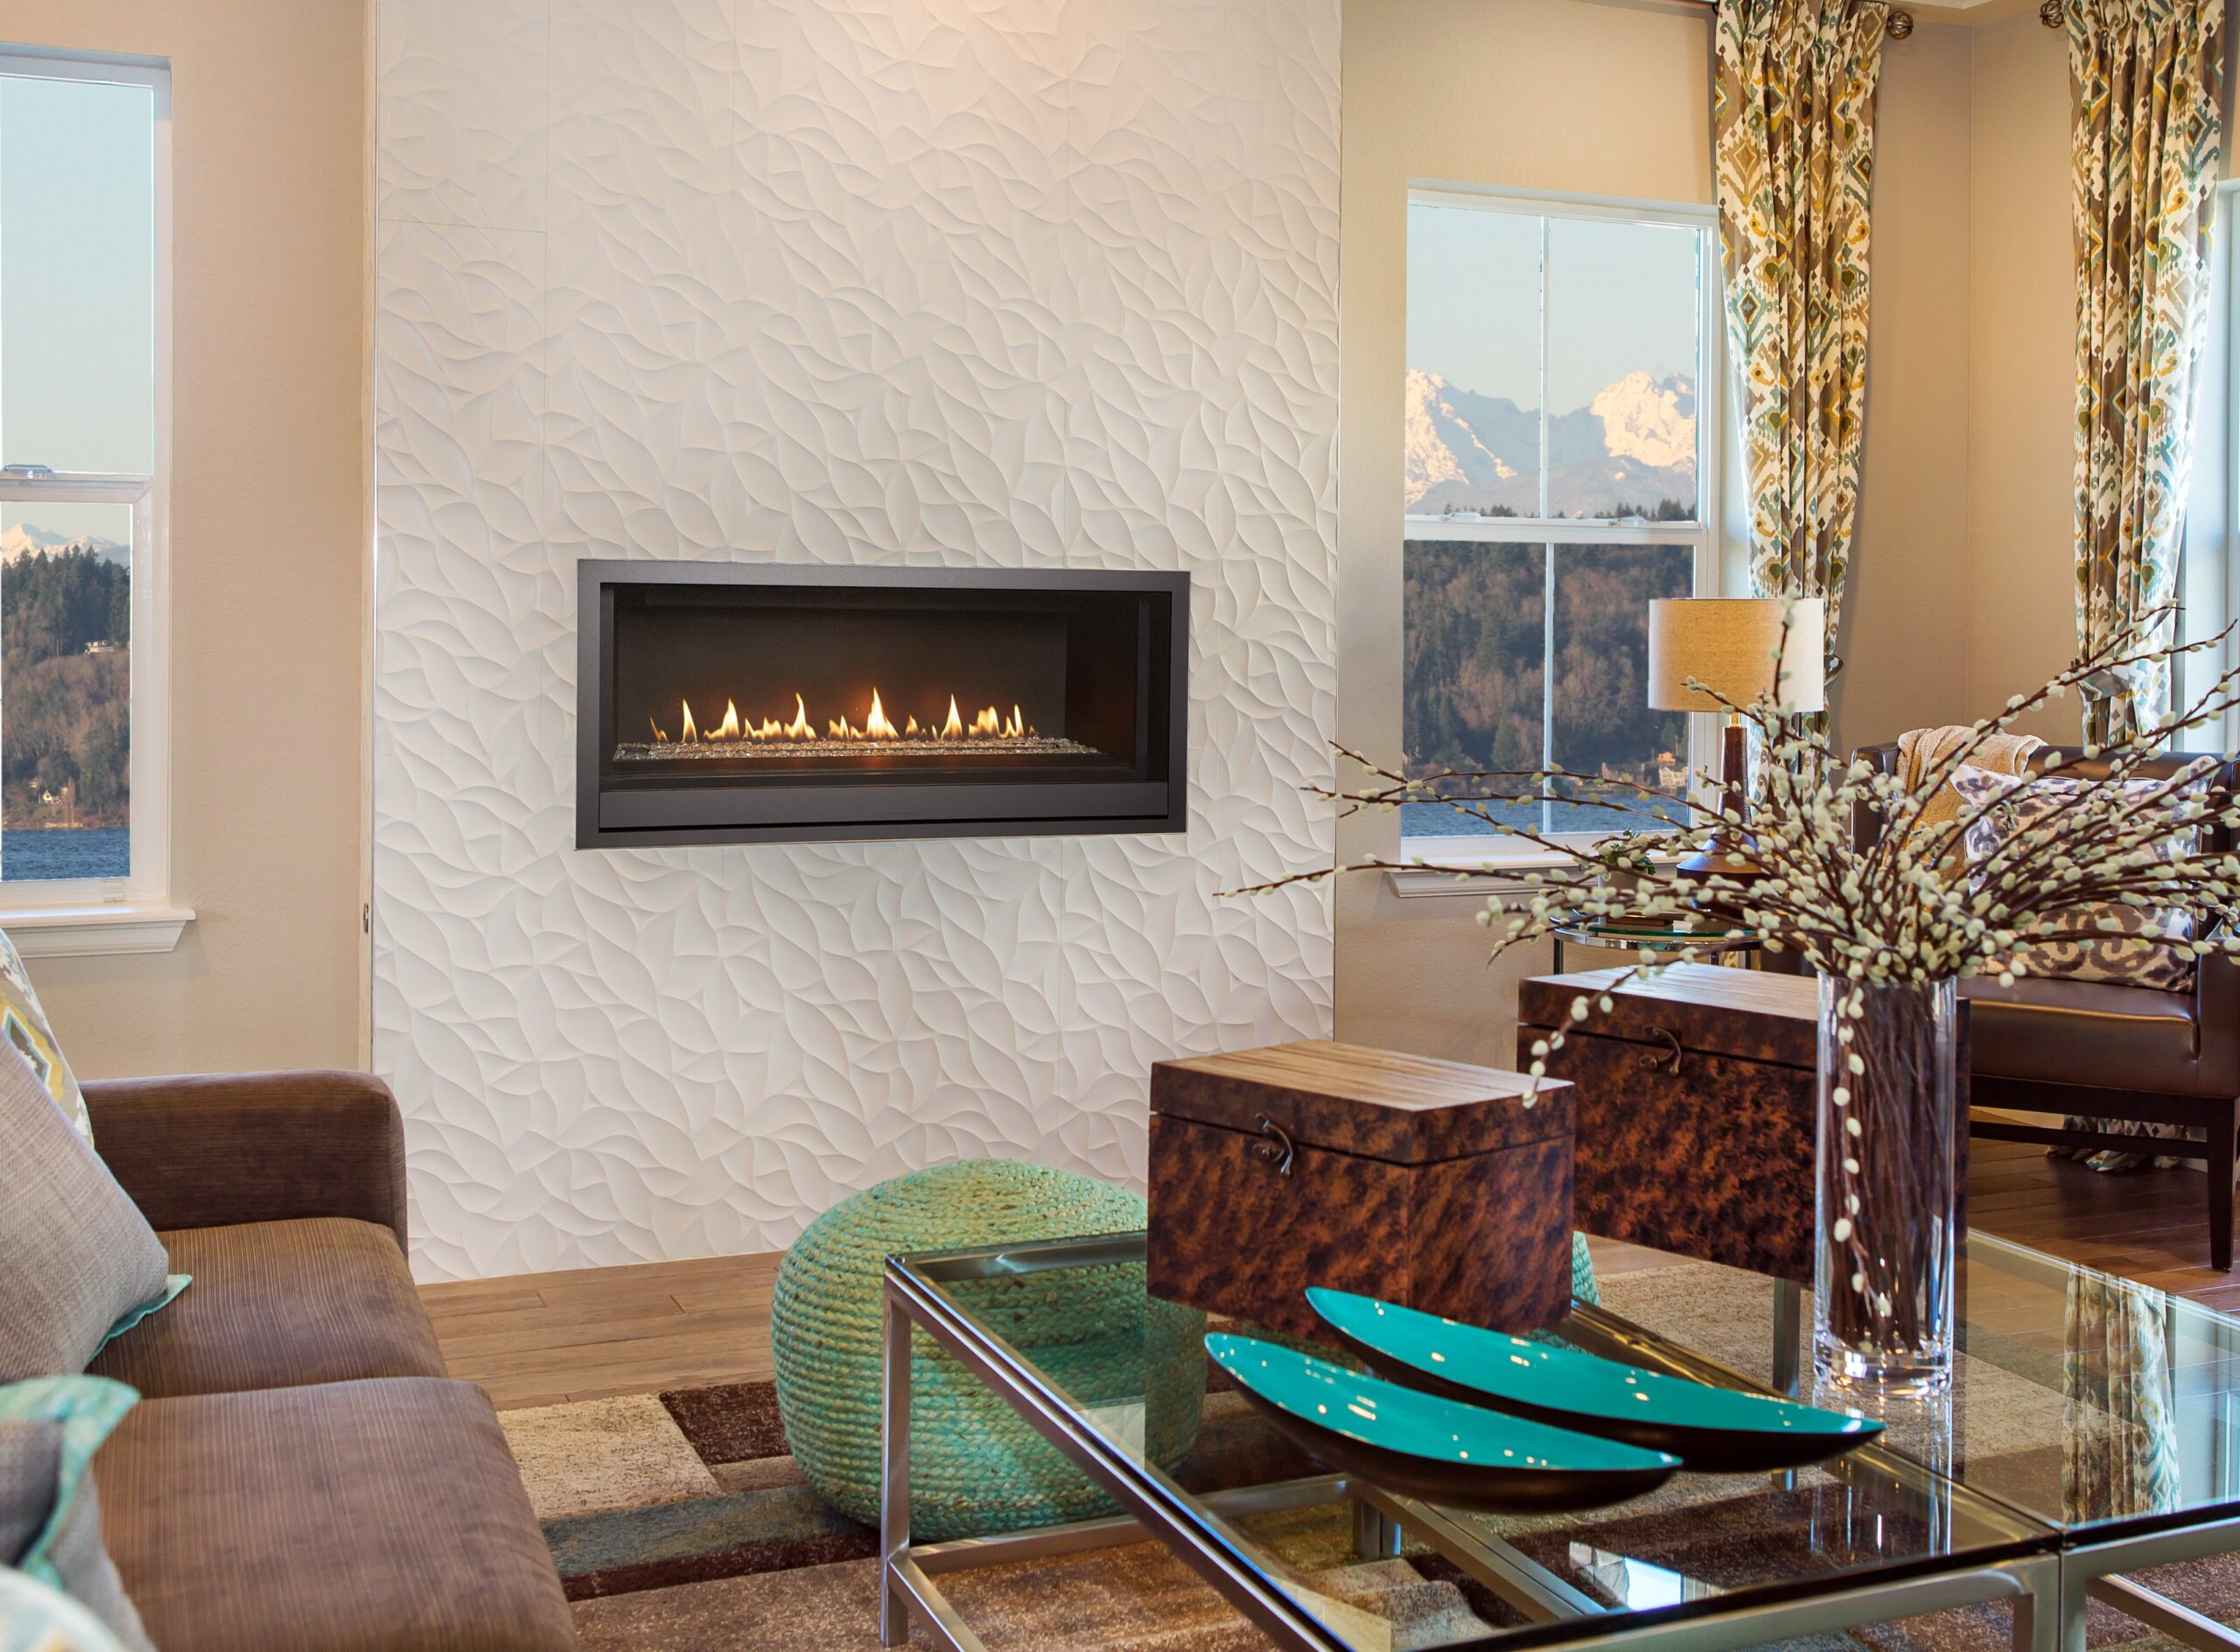 How do I pick a gas fireplace that’s right for me?